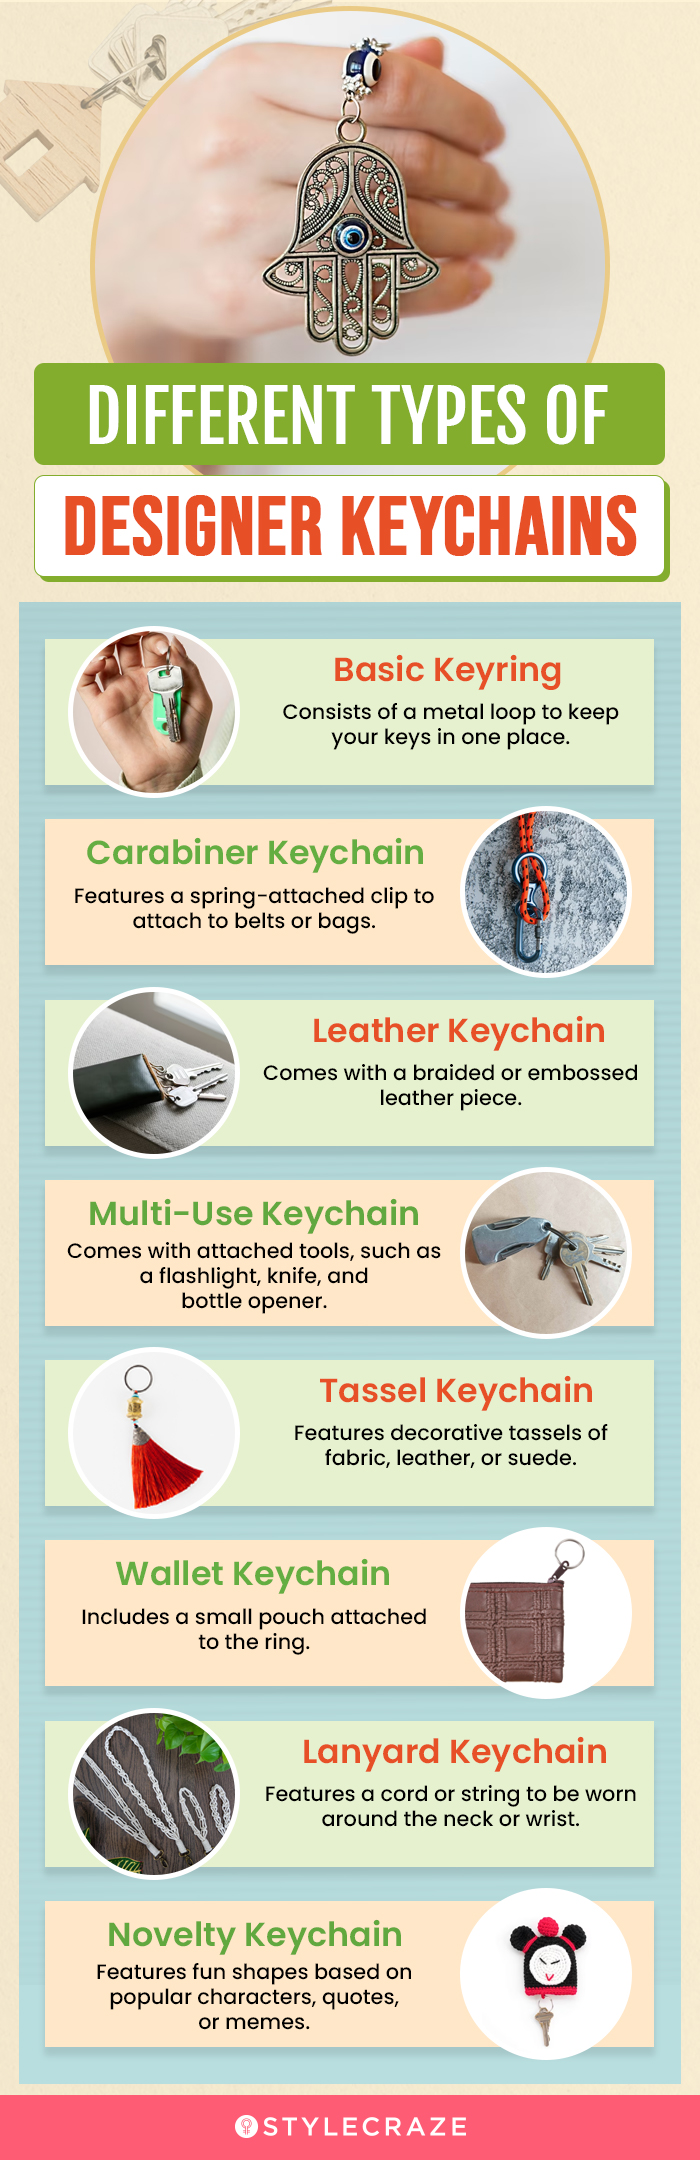 Different Types Of Designer Keychains (infographic)